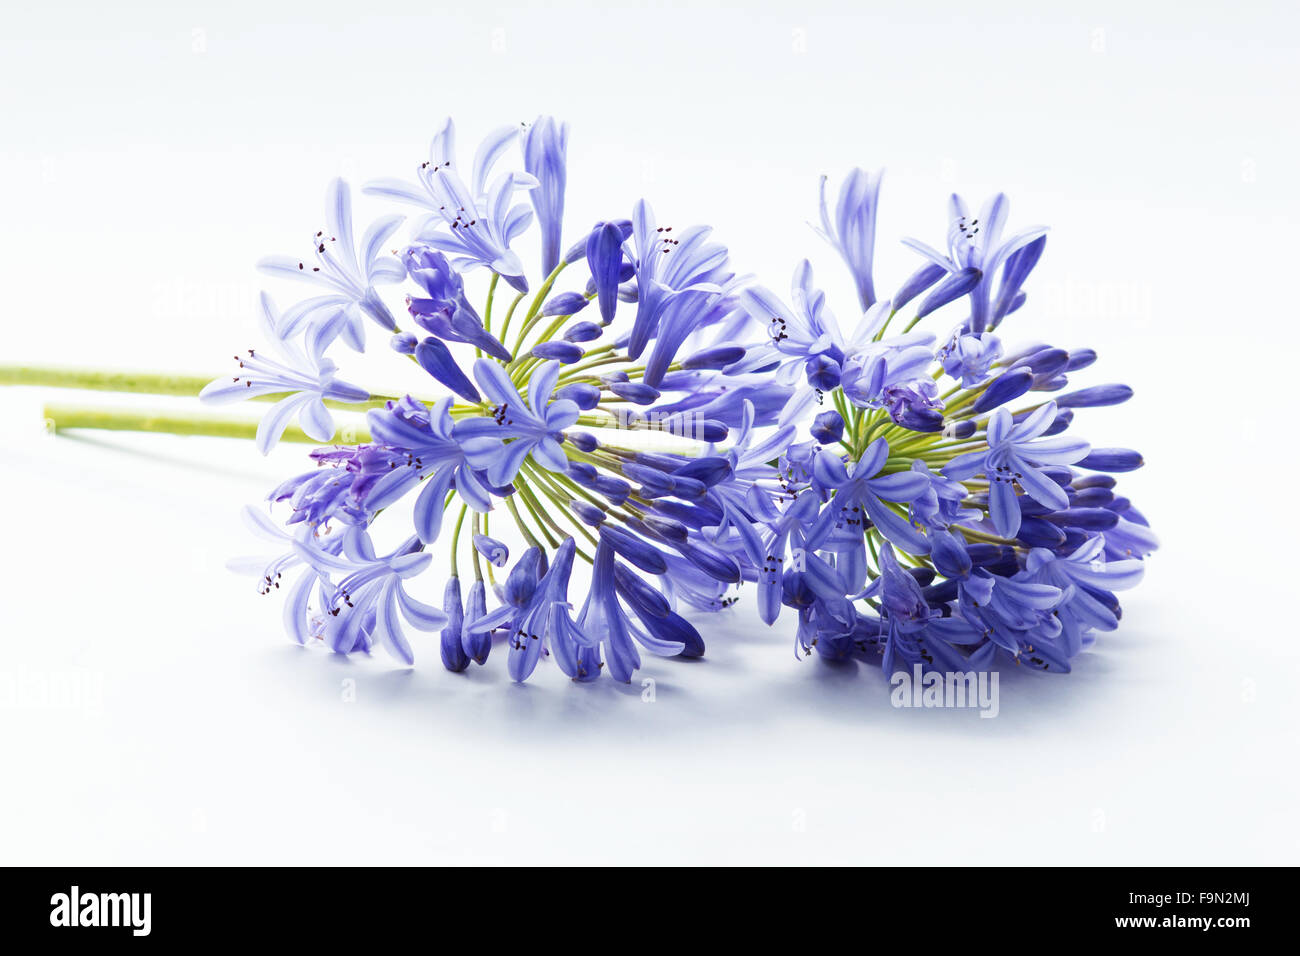 Blue African lily (Agapanthus africanus) on white background Stock Photo